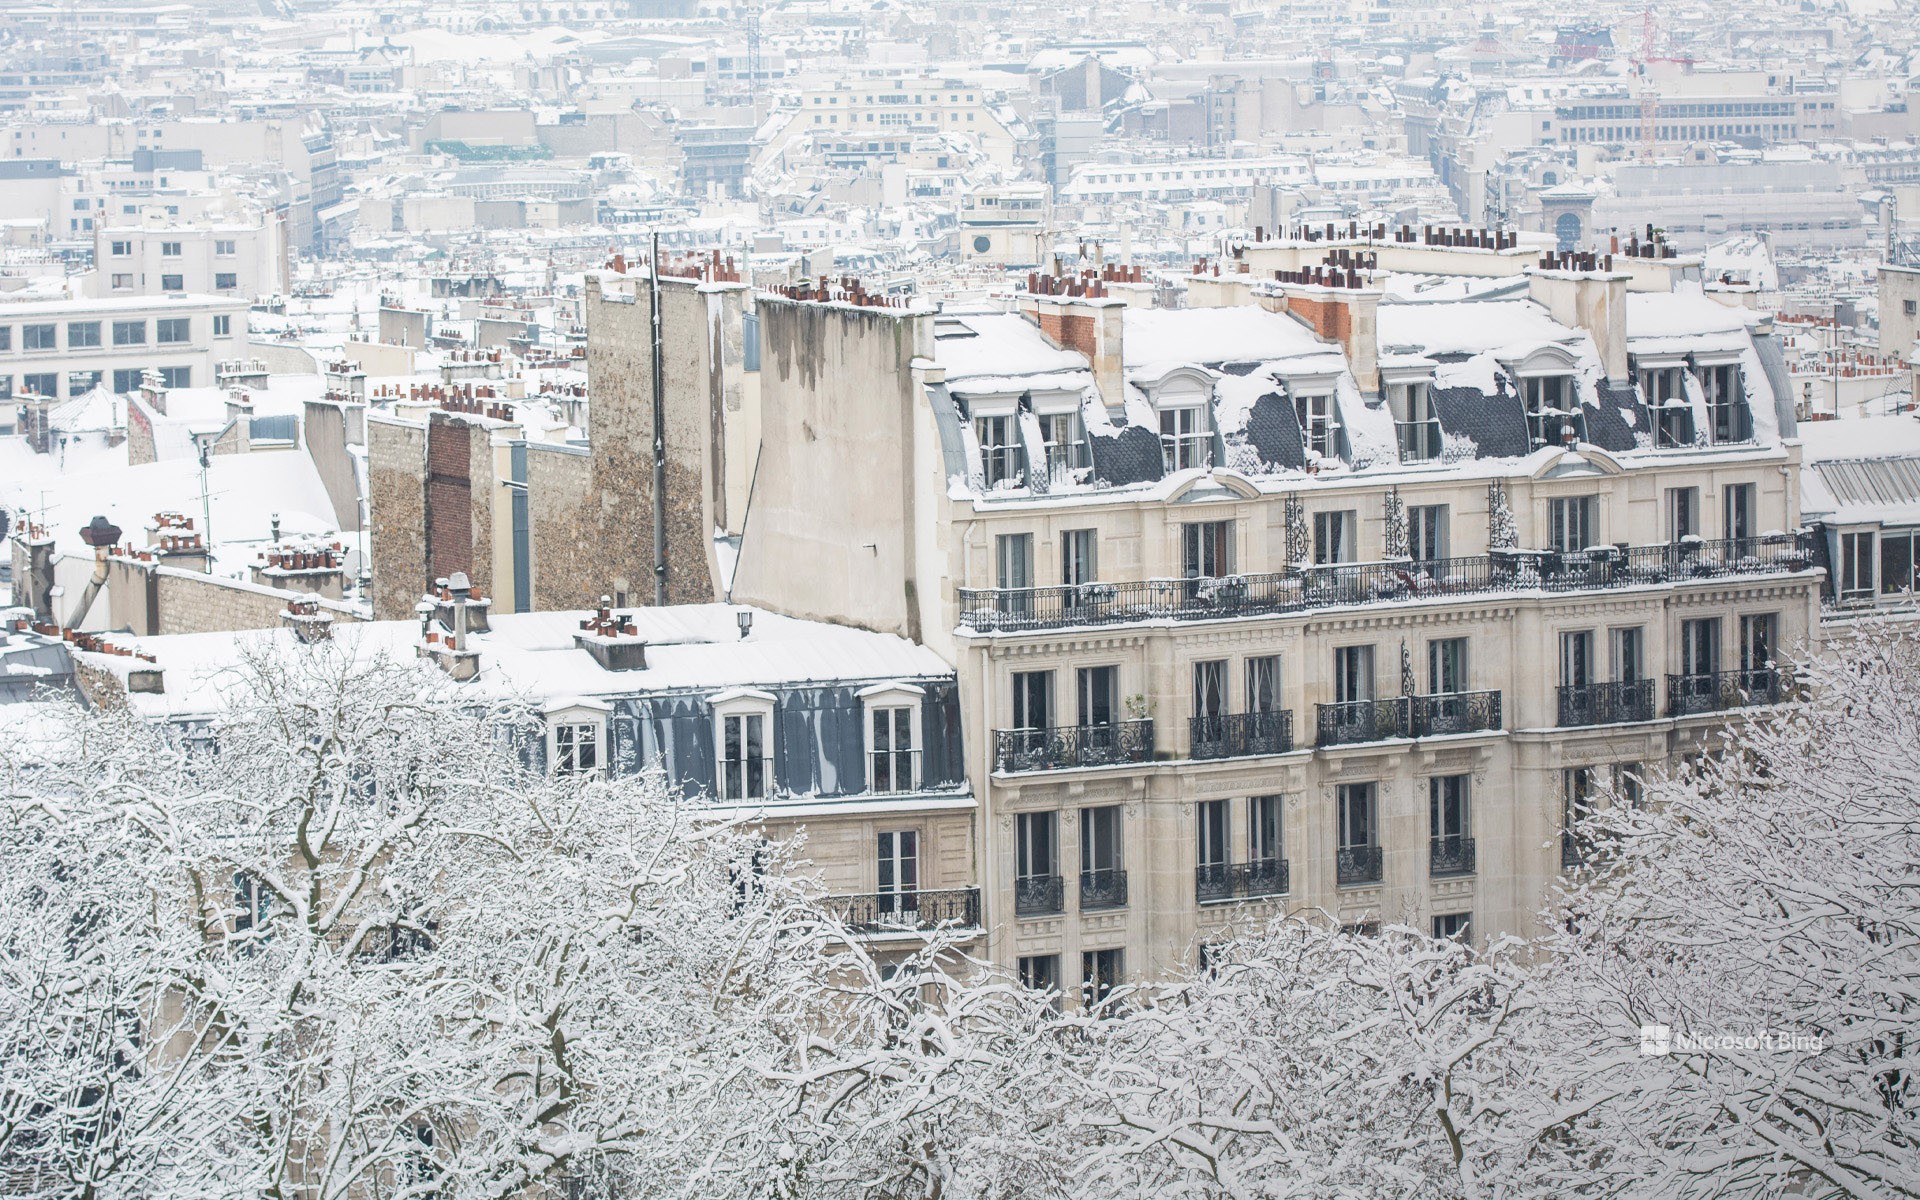 The roofs of Paris under the snow